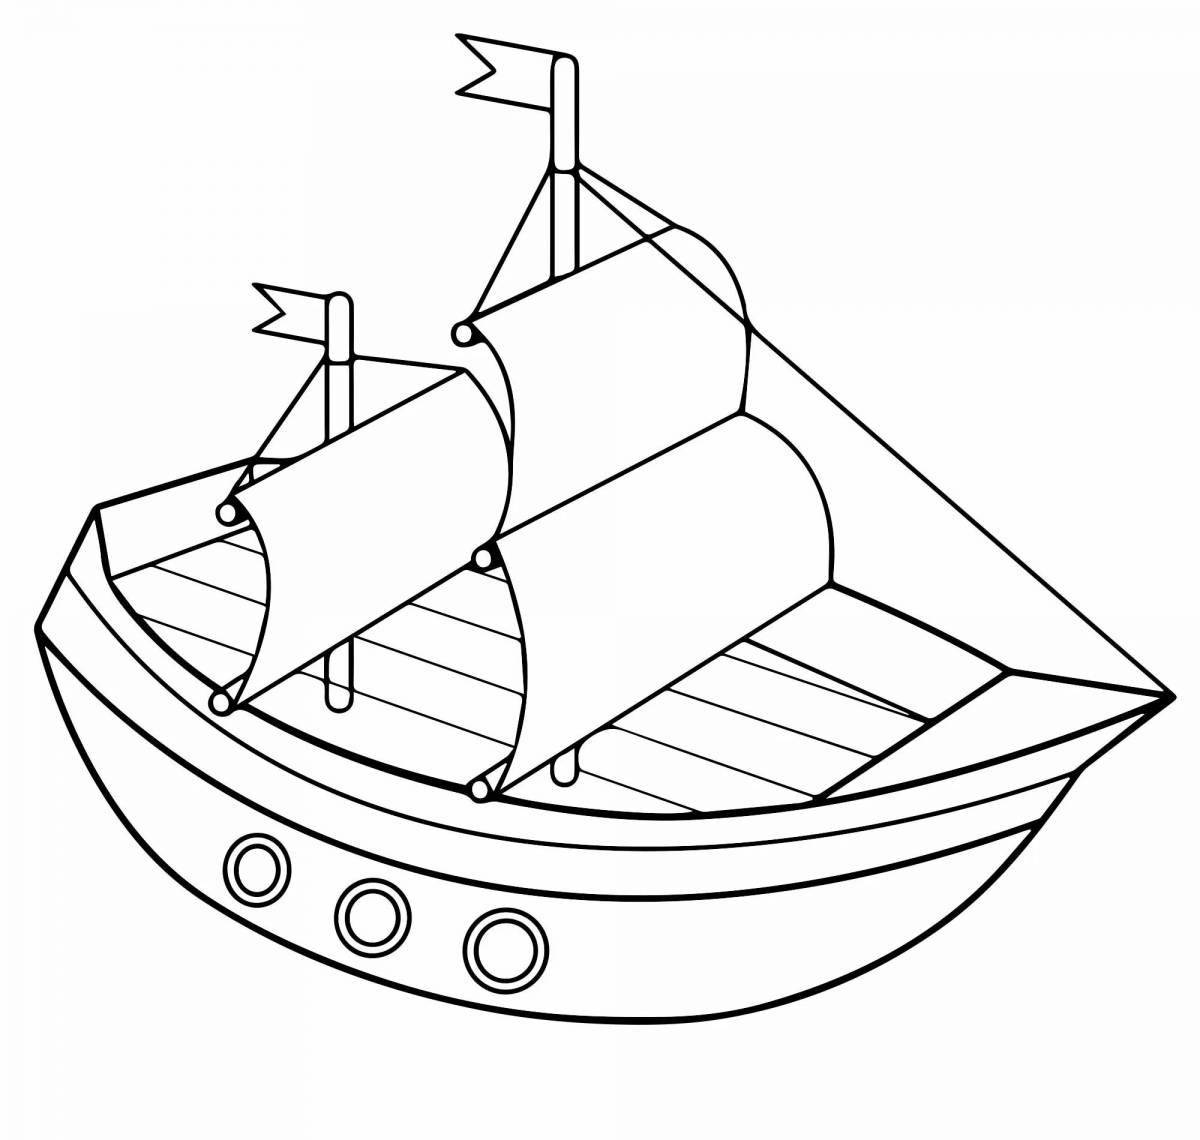 Incredible ship coloring book for 7 year olds